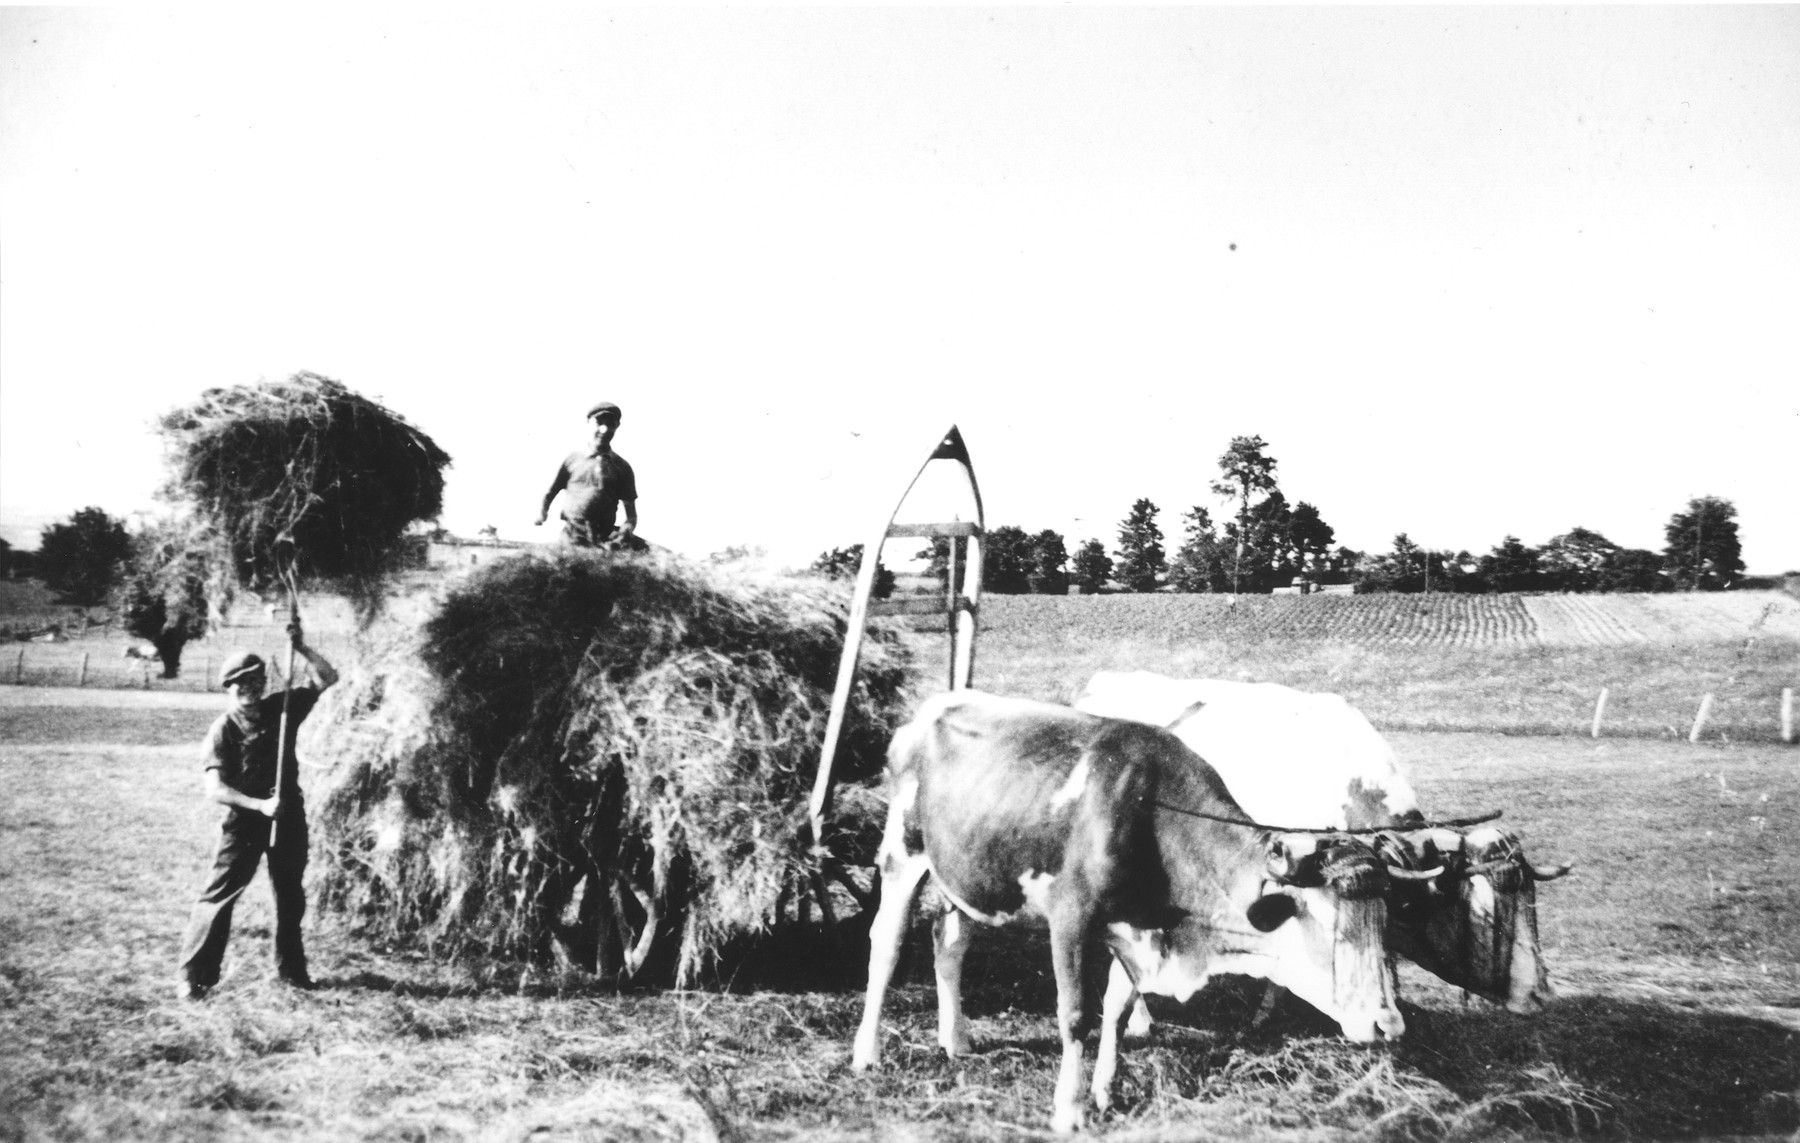 A hidden Jewish youth works on a hay wagon at a farm near Lyon, France.  

Pictured is the donor's brother, Herbert Karliner.